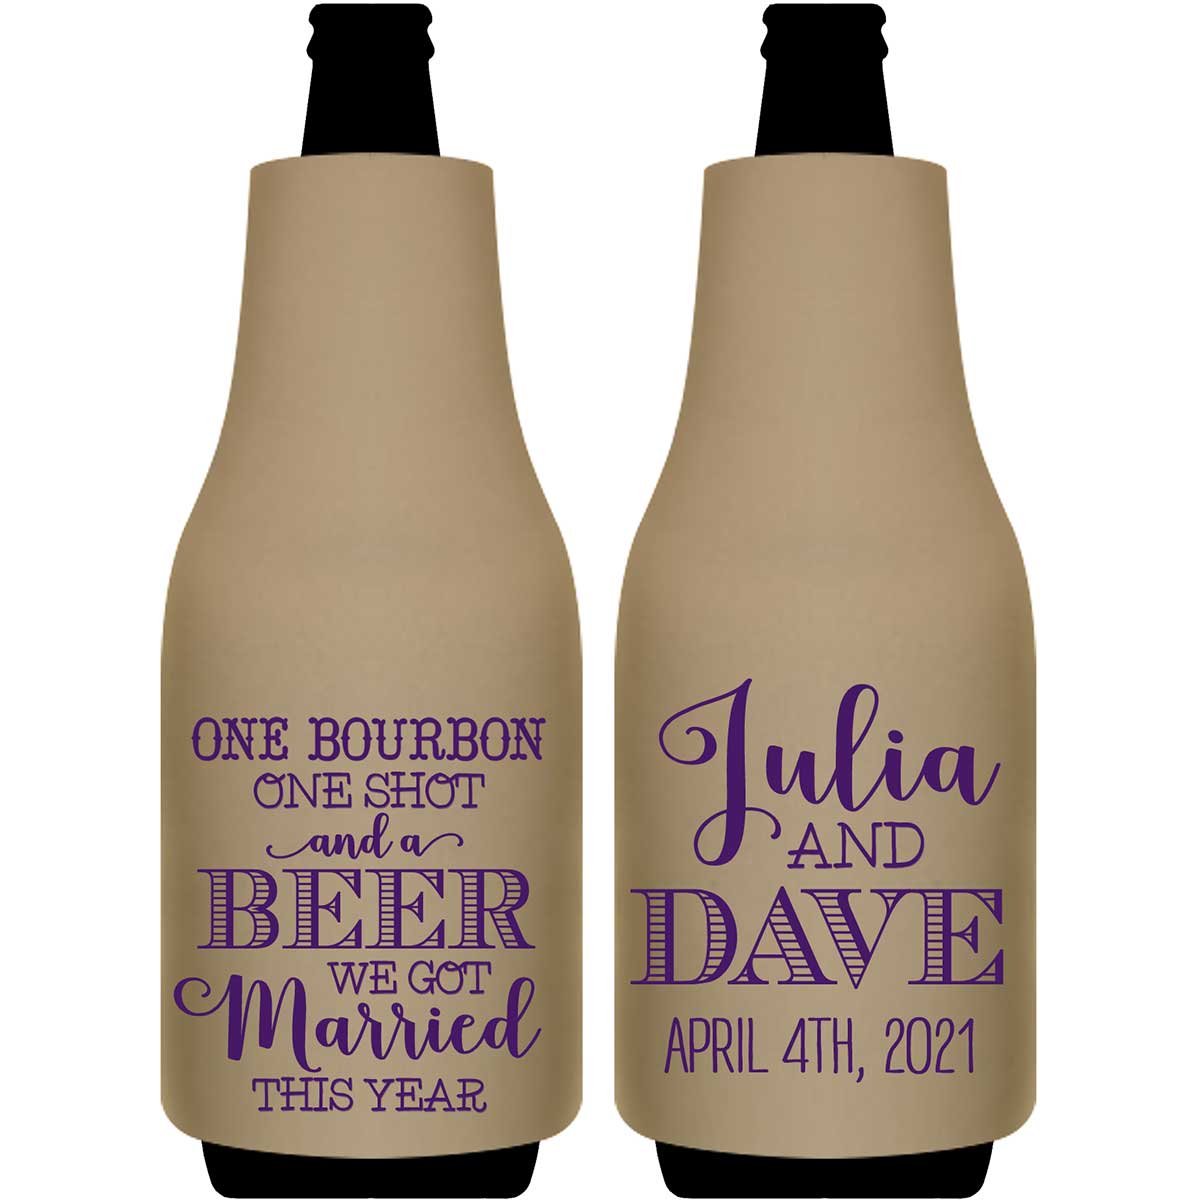 One Bourbon A Shot & A Beer 1A Foldable Bottle Sleeve Koozies Wedding Gifts for Guests